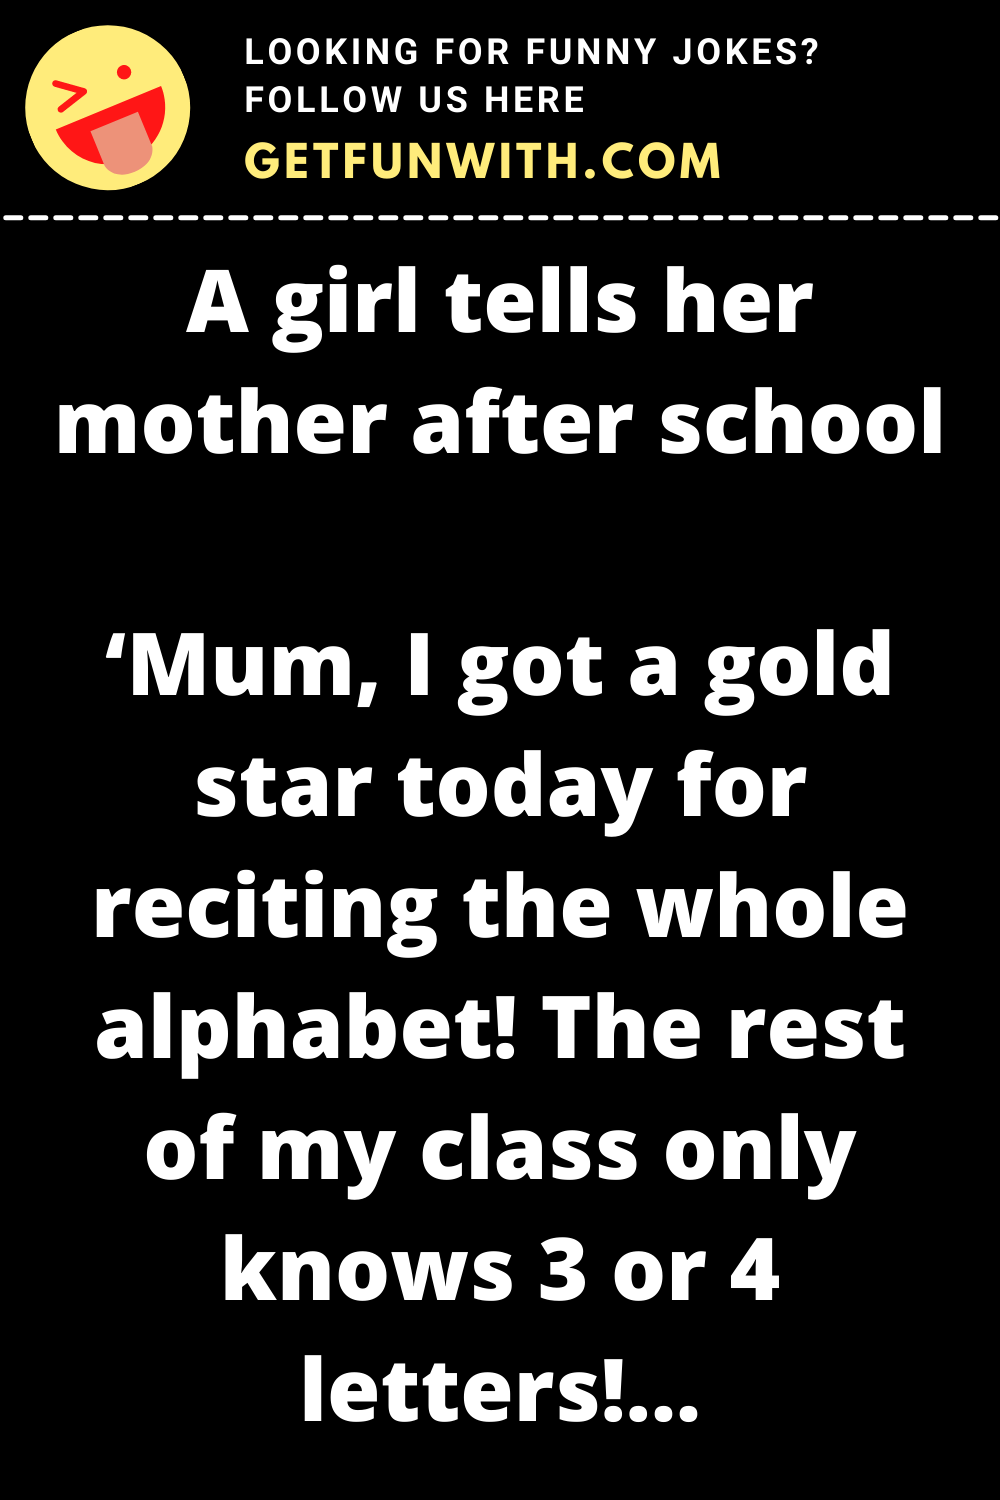 A girl tells her mother after school